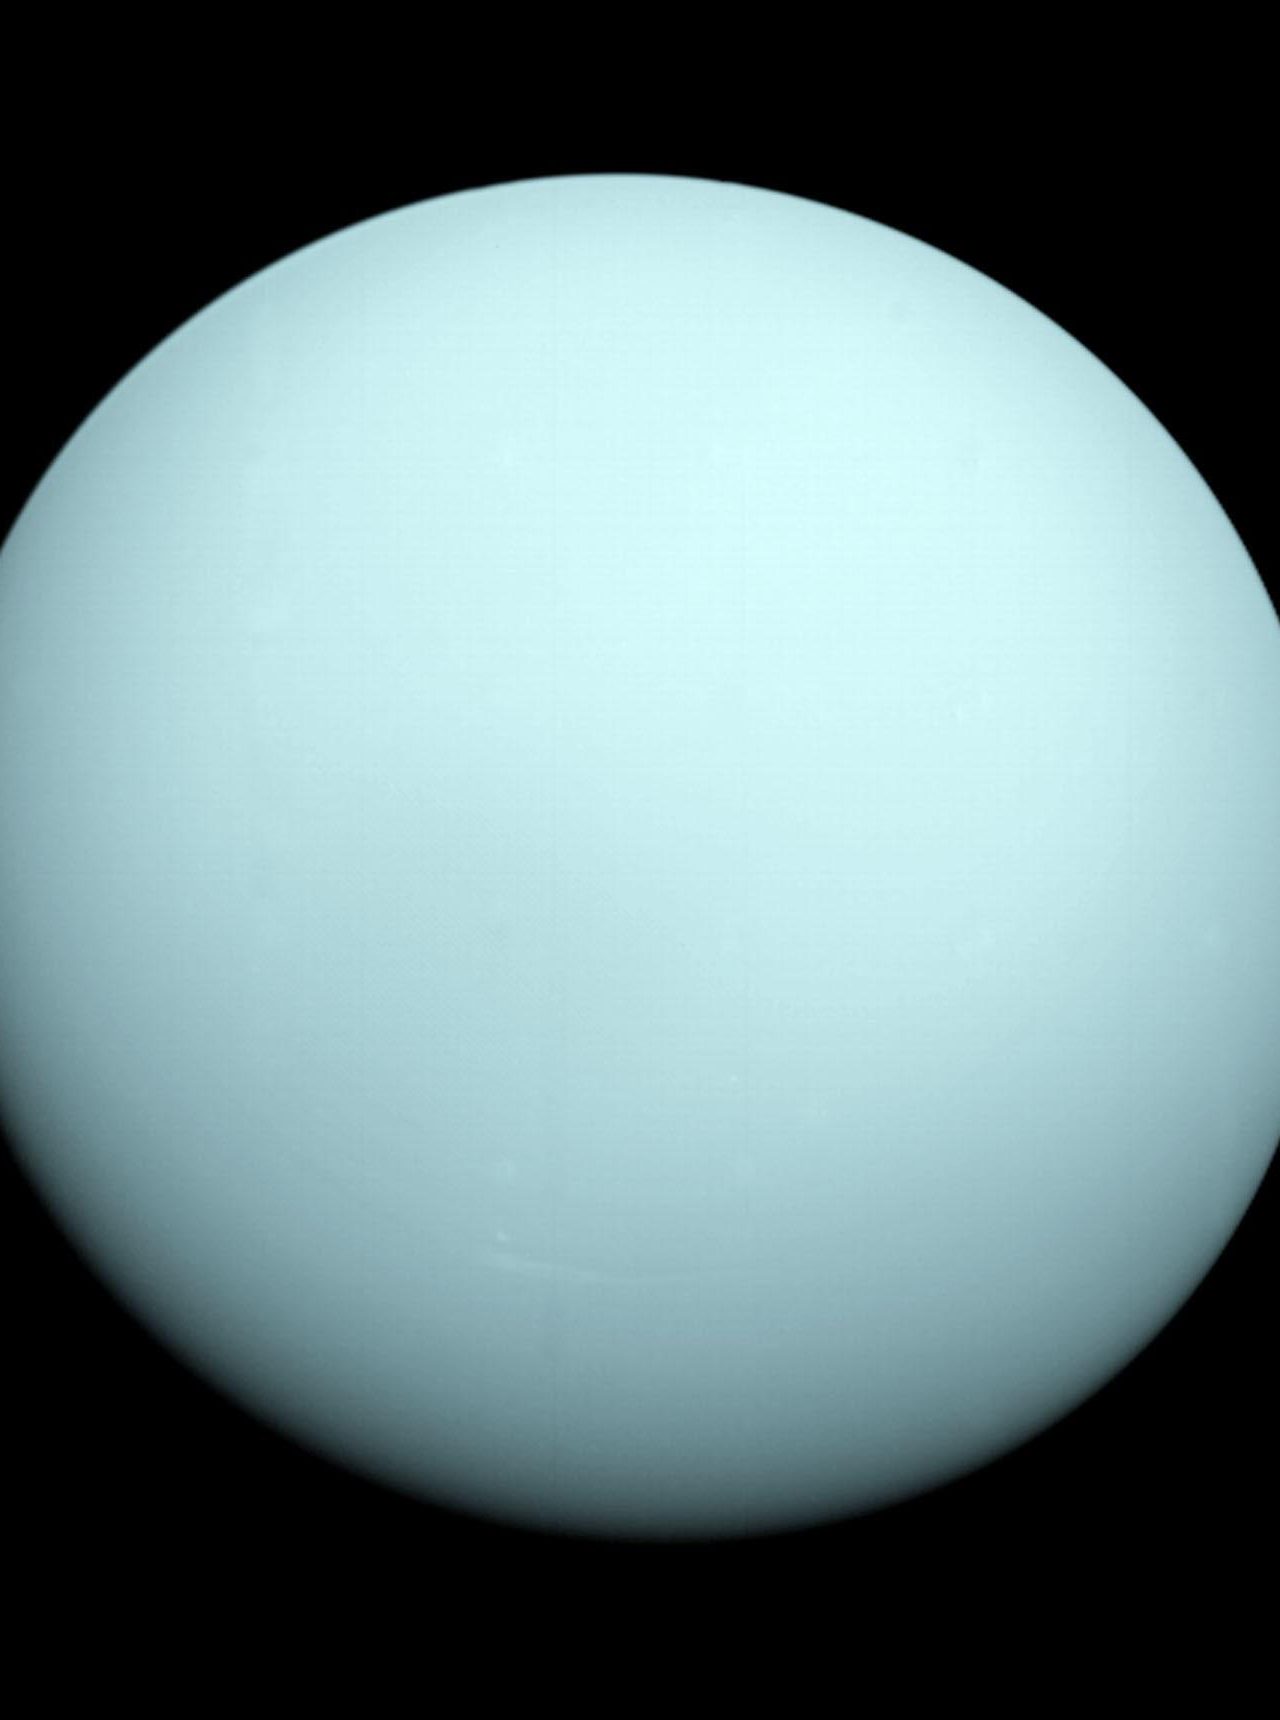 Voyager 2 revealed a lot about Uranus 